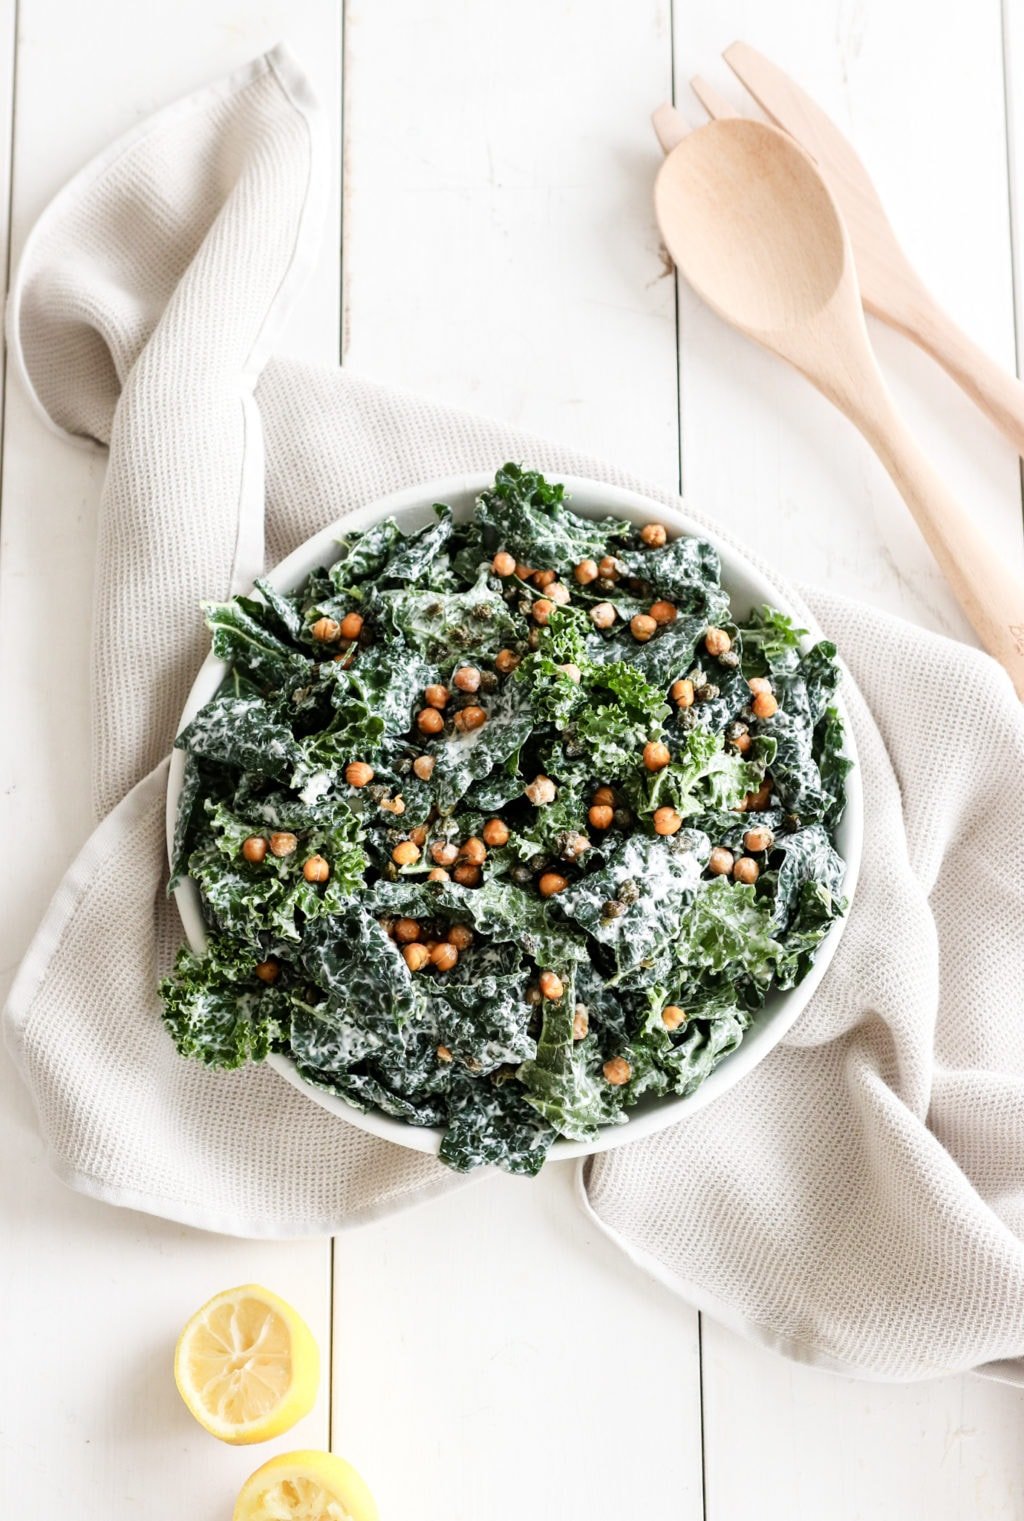 Kale salad with chickpeas in a big salad bowl